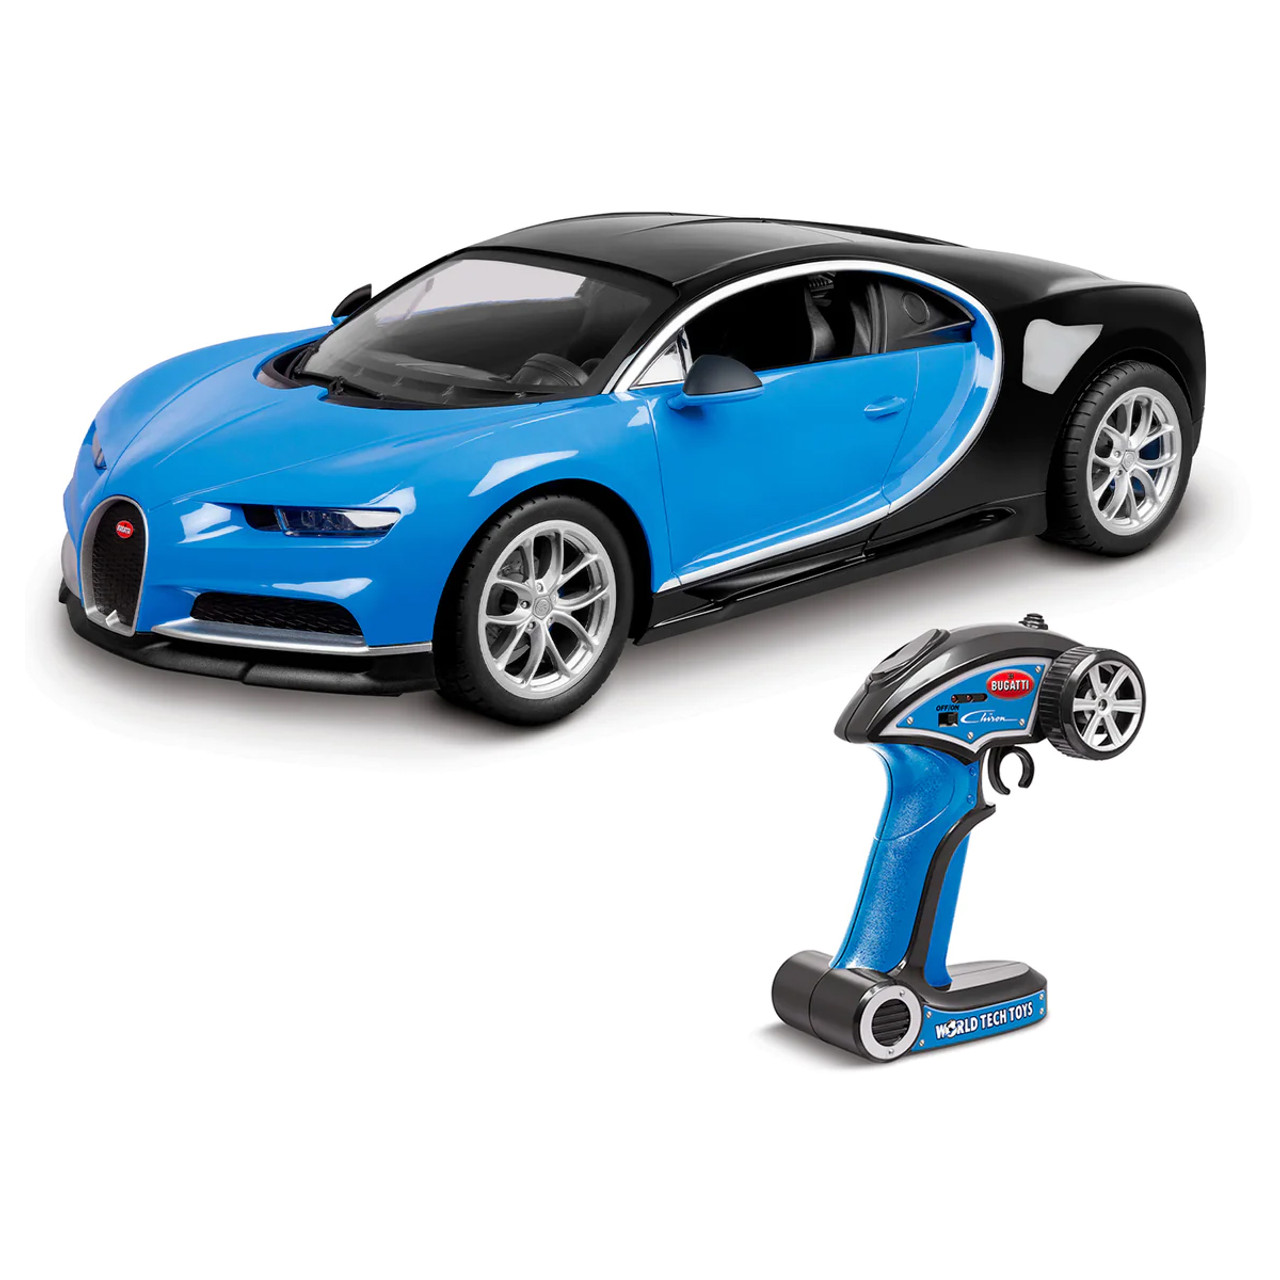 Bugatti Chiron 1:10 RTR Electric 2.4Ghz RC Car product image